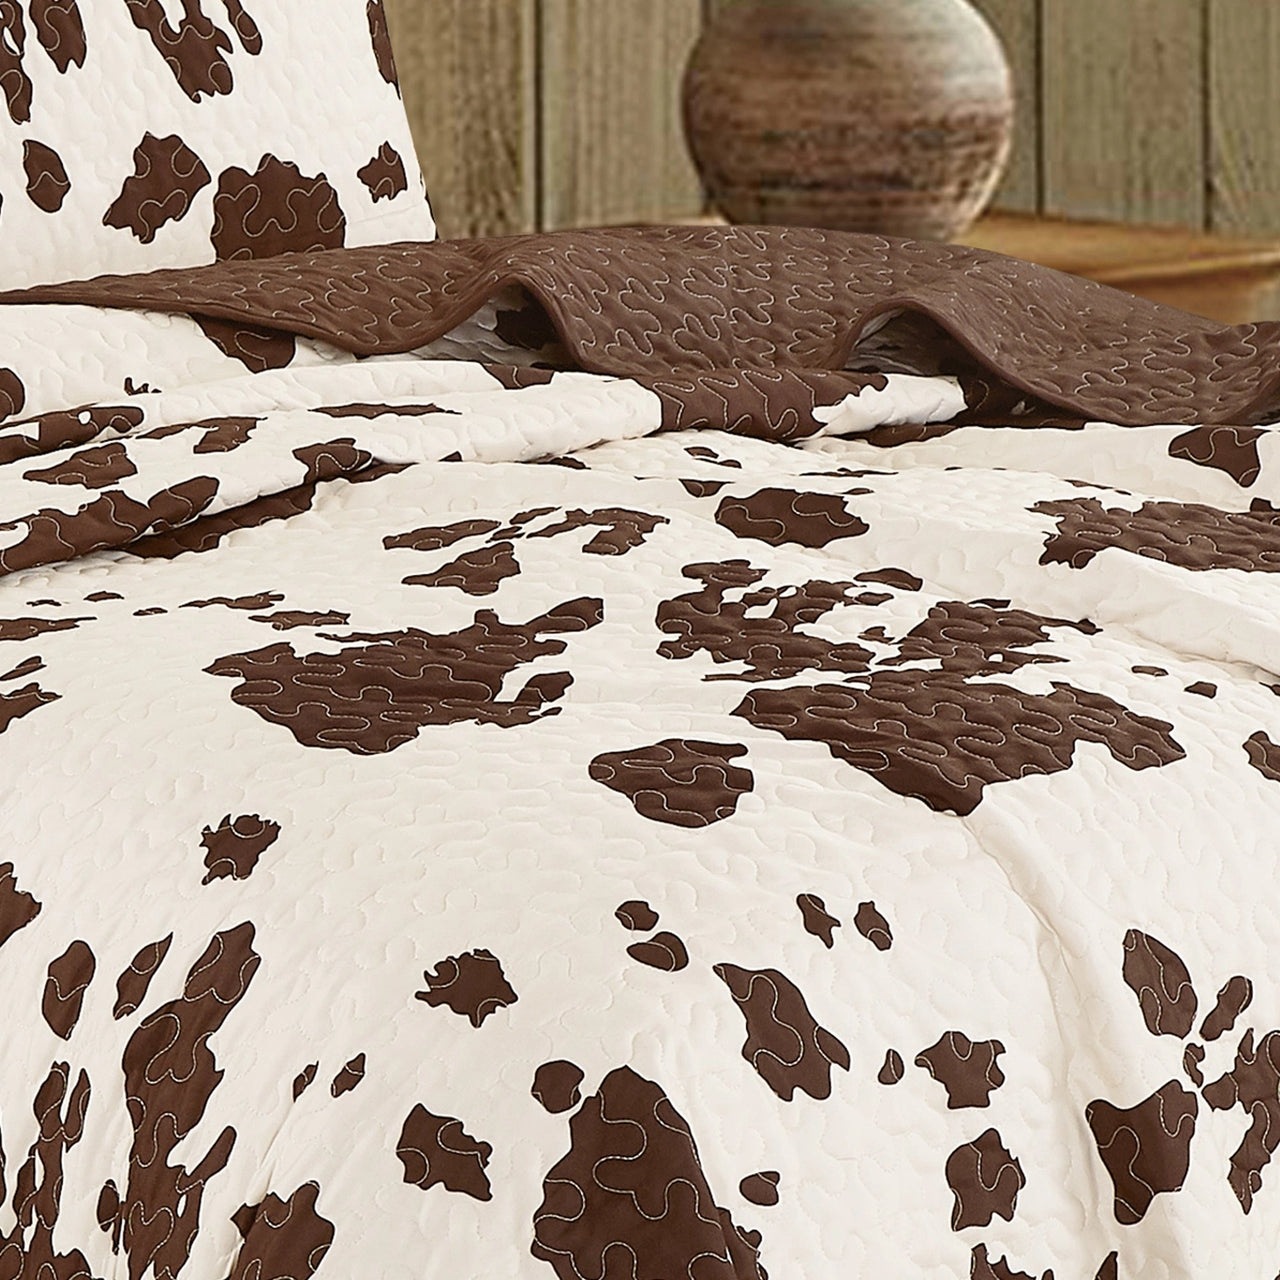 Rustic Cowhide Brown Bedspread Quilt - 3 Piece Set Tony's Home Furnishings Furniture. Beds. Dressers. Sofas.